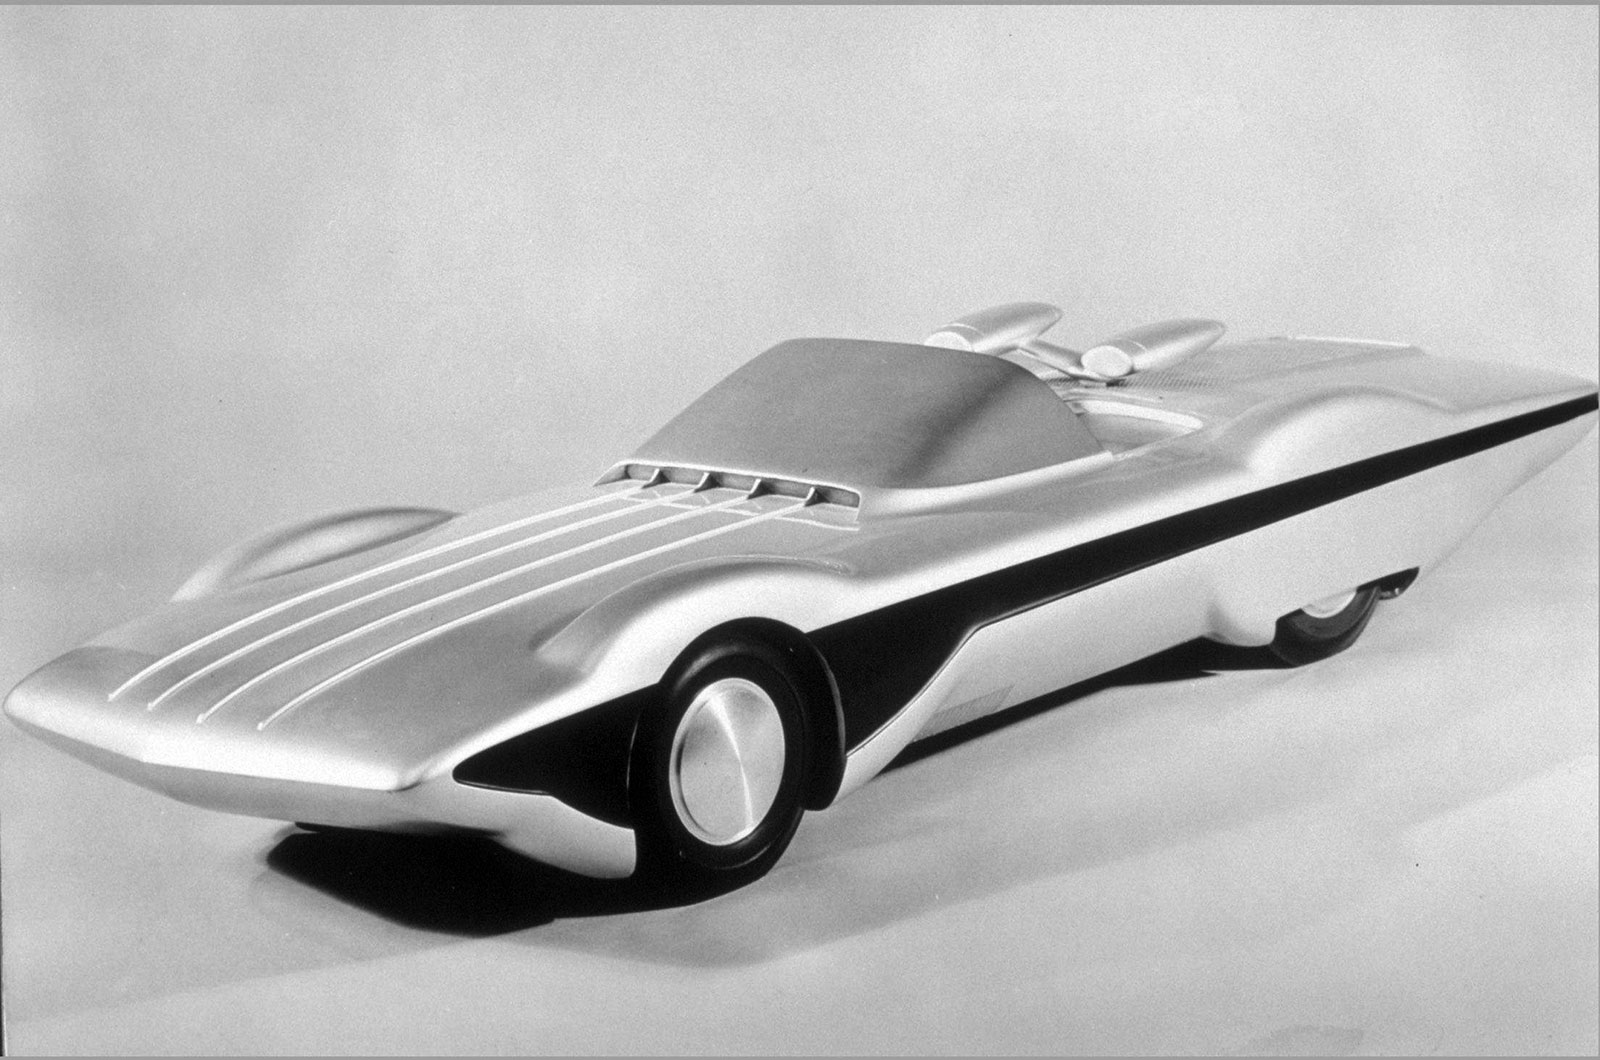 <p>The Ford DePaolo was named after Indy 500 racer <strong>Peter DePaolo </strong>(1898-1980), who had enjoyed success in the 1930s. Designed by <strong>Buzz Grisinger </strong>(1908-2002), the DePaolo was intended to be a key exhibit in Ford's <strong>Stylerama </strong>project – dreamed up to compete with GM's <strong>Motorama </strong>which toured the US in the 1950s. But Stylerama was canned before it ever reached fruition, and with it went the DePaolo.</p>